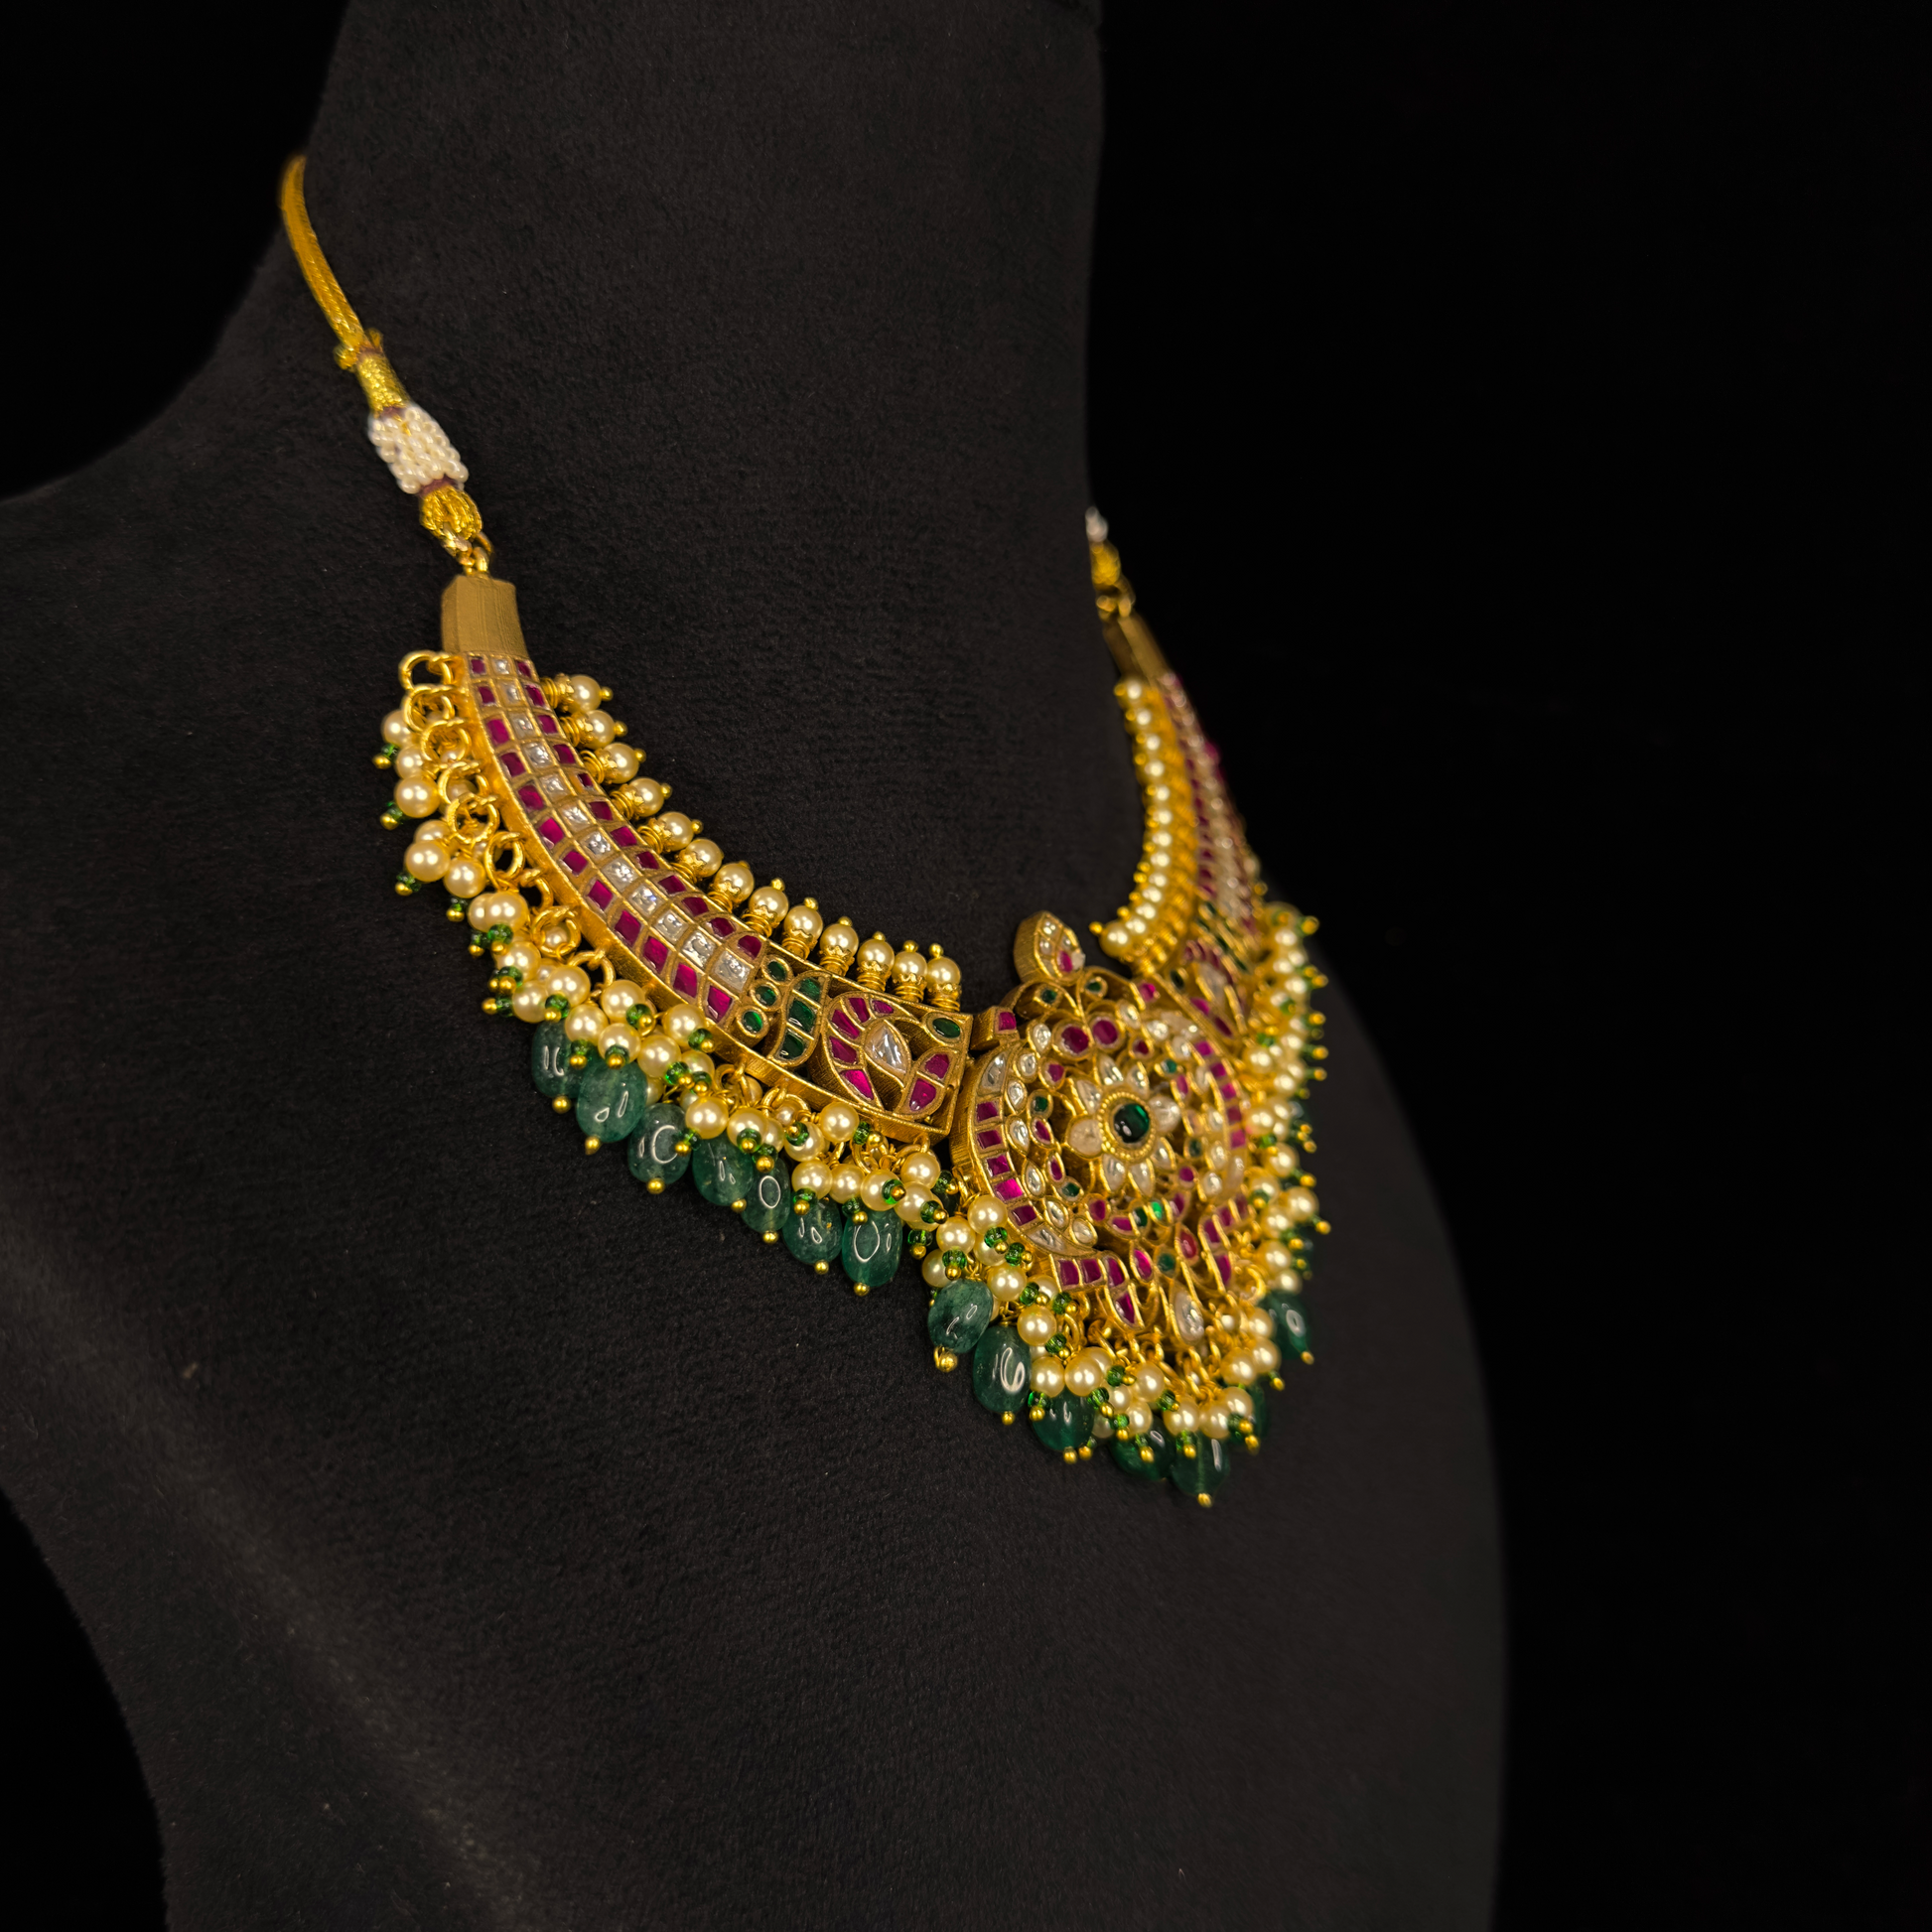 Opulent Charm: Jadau Kundan Necklace with Intricate Motifs and Emerald Drops with 22k gold plating This product belongs to jadau kundan jewellery category